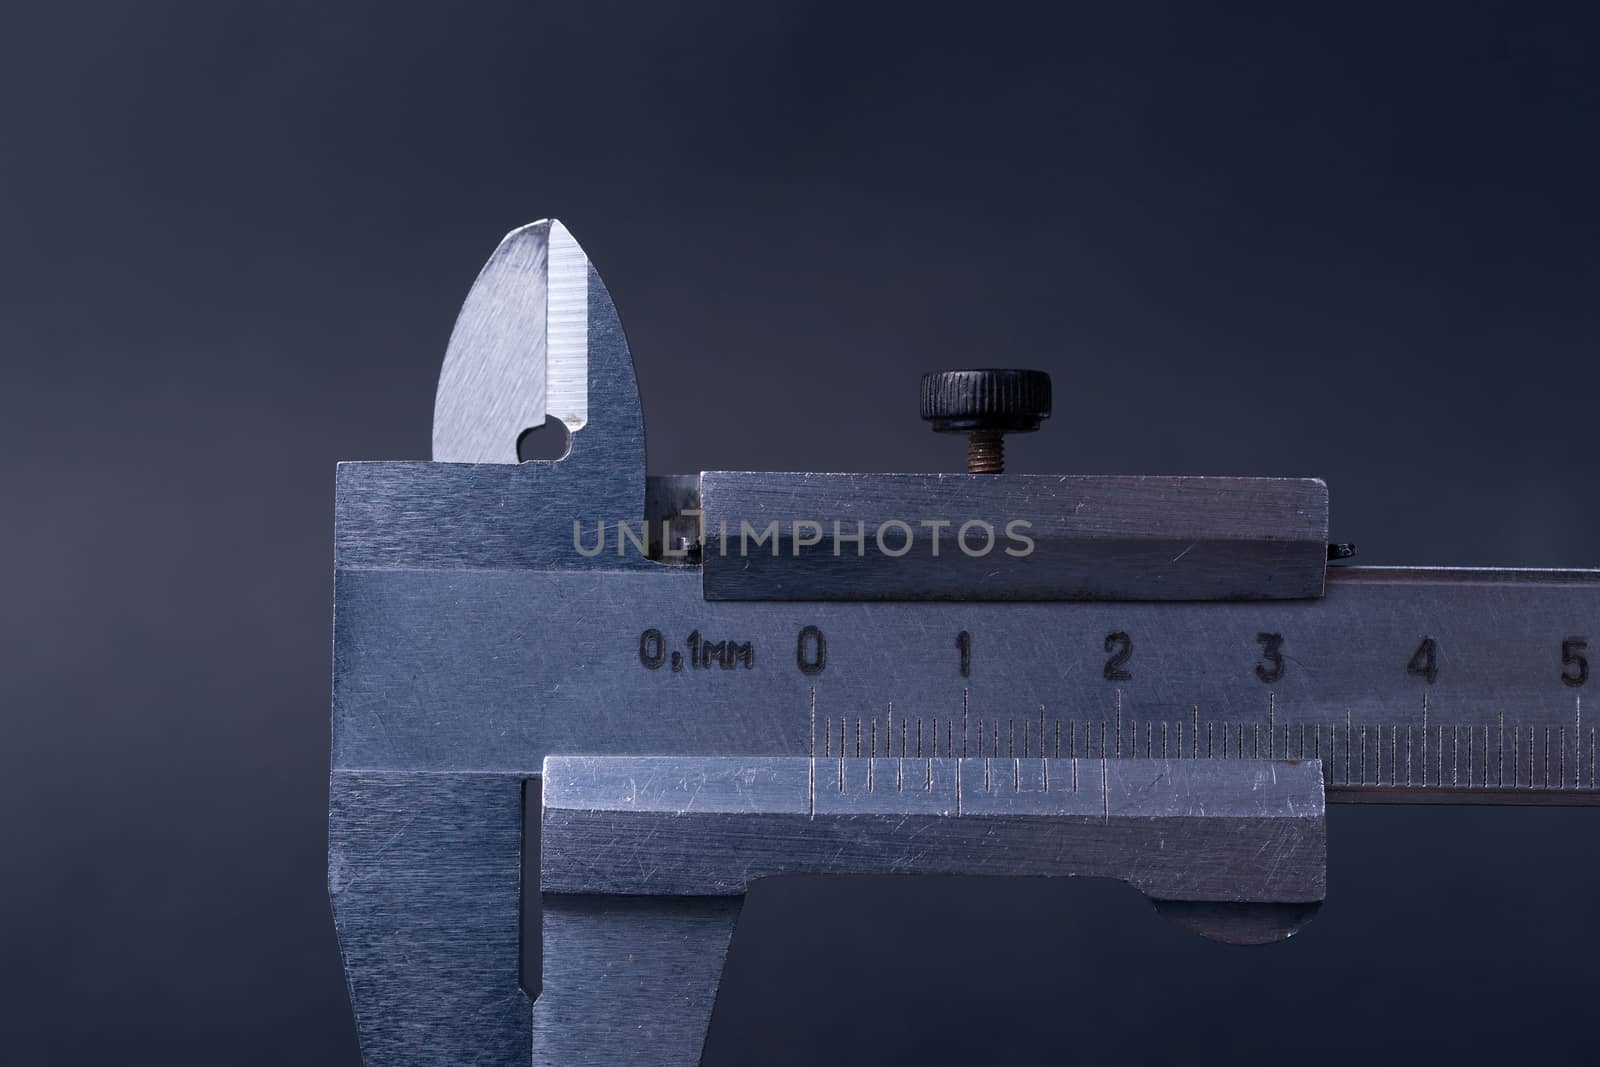 Vintage steel caliper tool closeup. Caliper tips and scale in focus. Tool in very good condition. Scale in metric units, milimeter step. Stock photo on blurred gray background. by alexsdriver